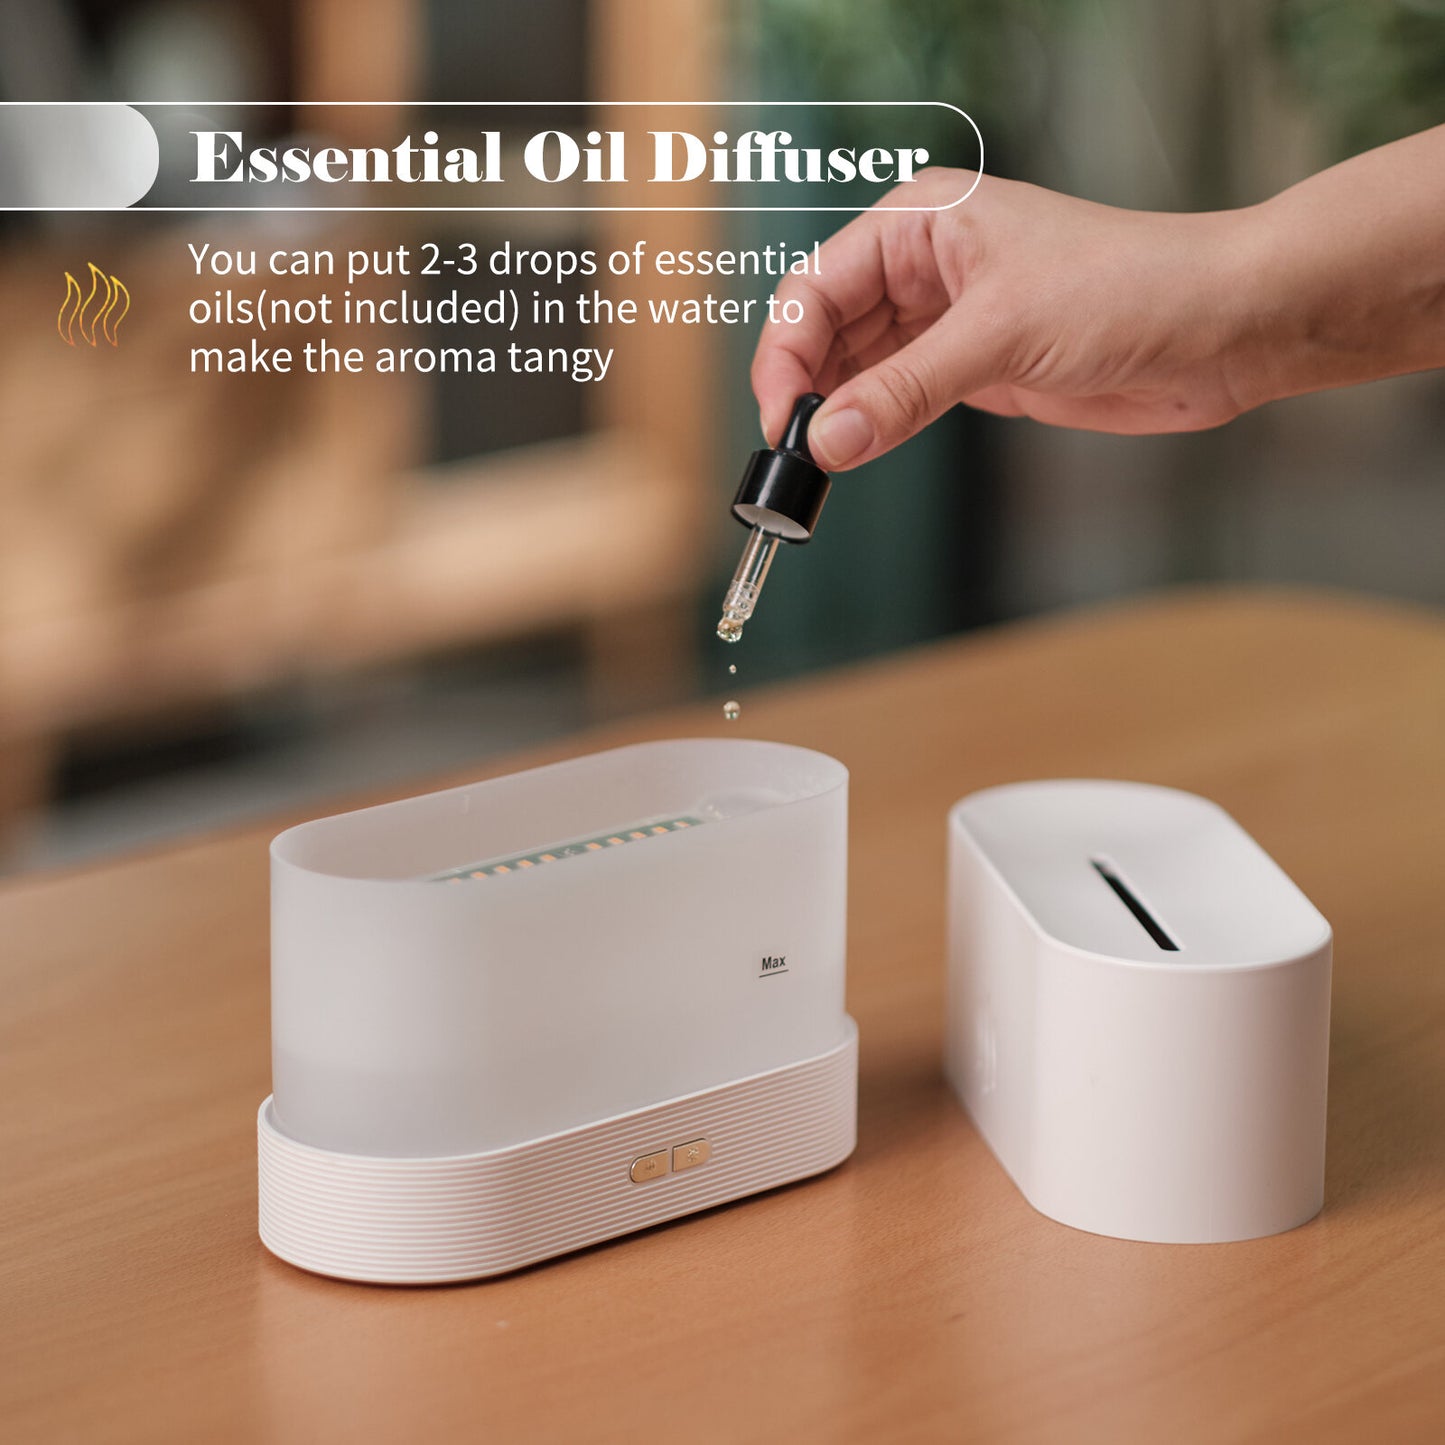 Diffuser Home Dehumidifier - Add your favorite essential oil to make the aroma tangy